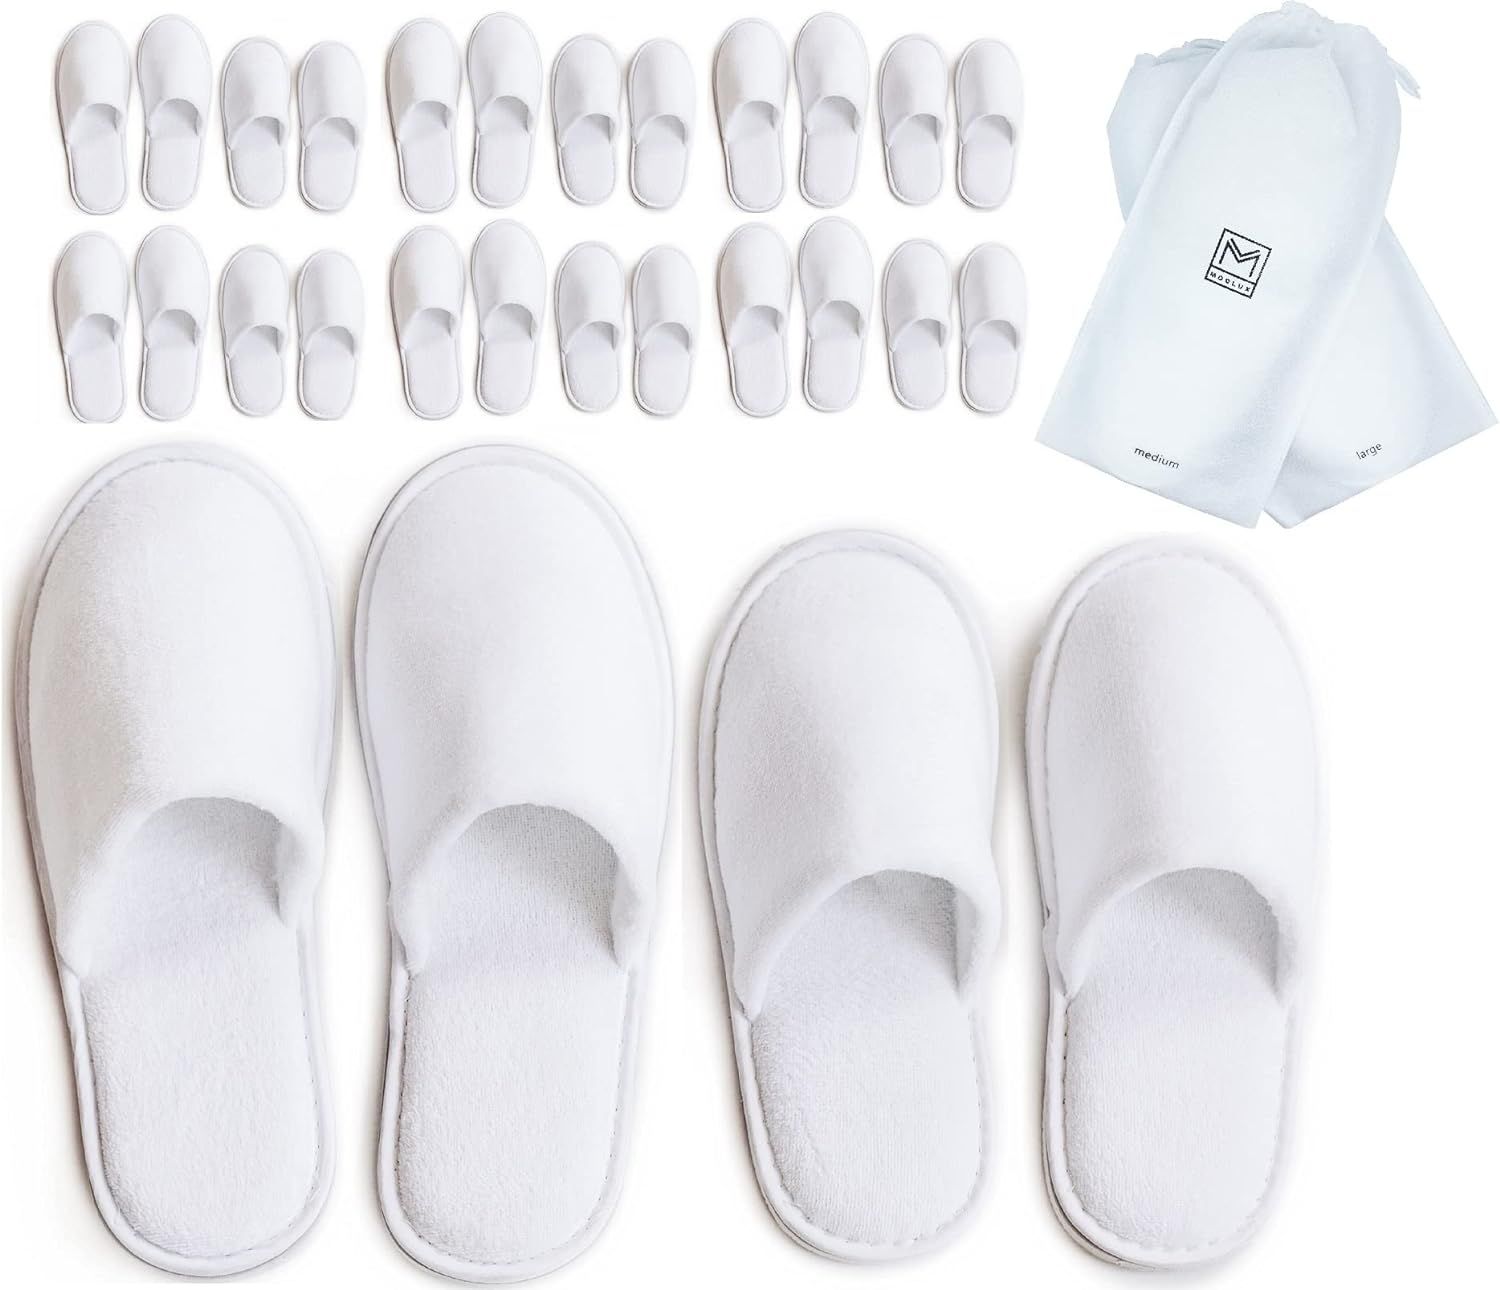 MODLUX Spa Slippers - 12 Pairs of Cotton Velvet Closed Toe Slippers w/Travel Bags – Thick, Soft, Non | Amazon (US)